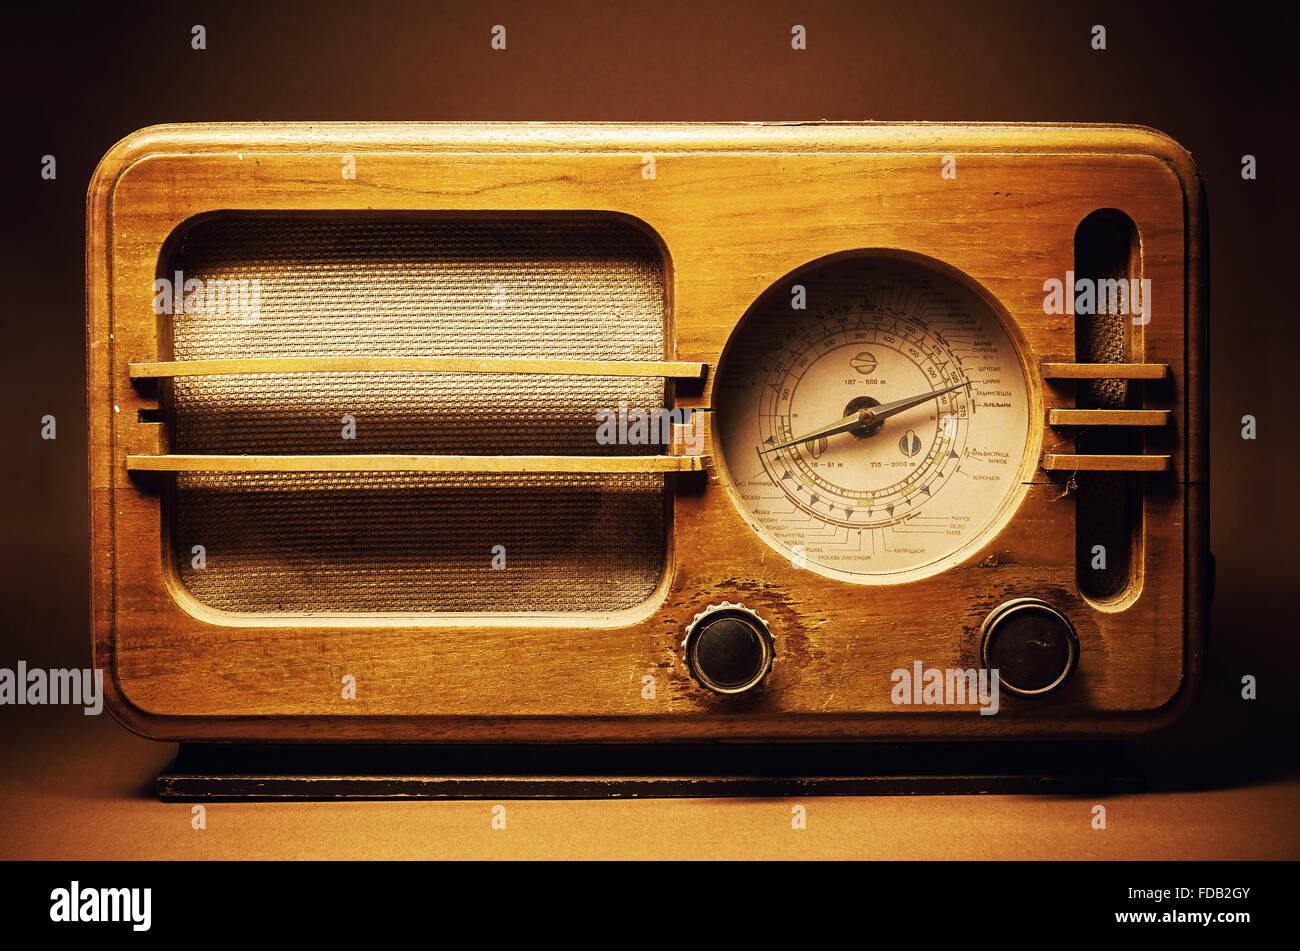 Design of an old wooden radio device. Names of European towns written in  Cyrillic as radio stations. Balkan retro style from fir Stock Photo - Alamy